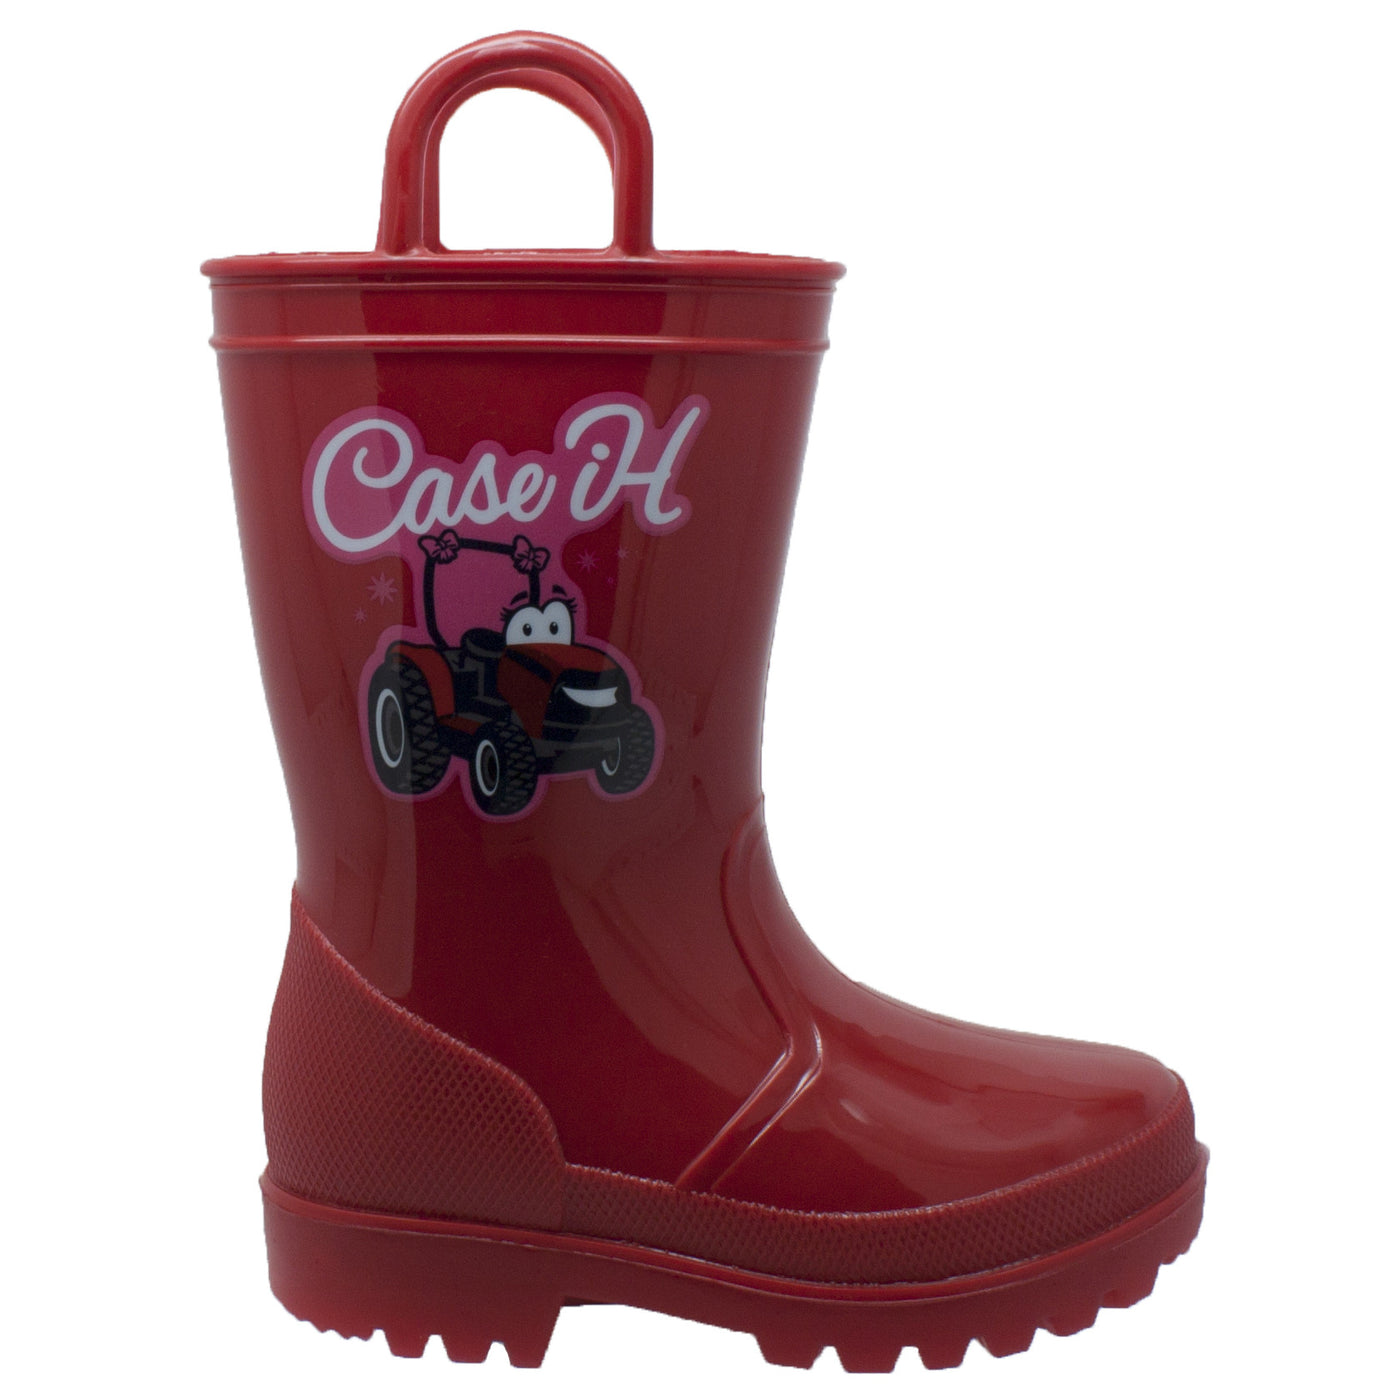 Toddler's PVC Boot with Light-Up Outsole Red - CI-5011 - Shop Genuine Leather men & women's boots online | AdTecFootWear